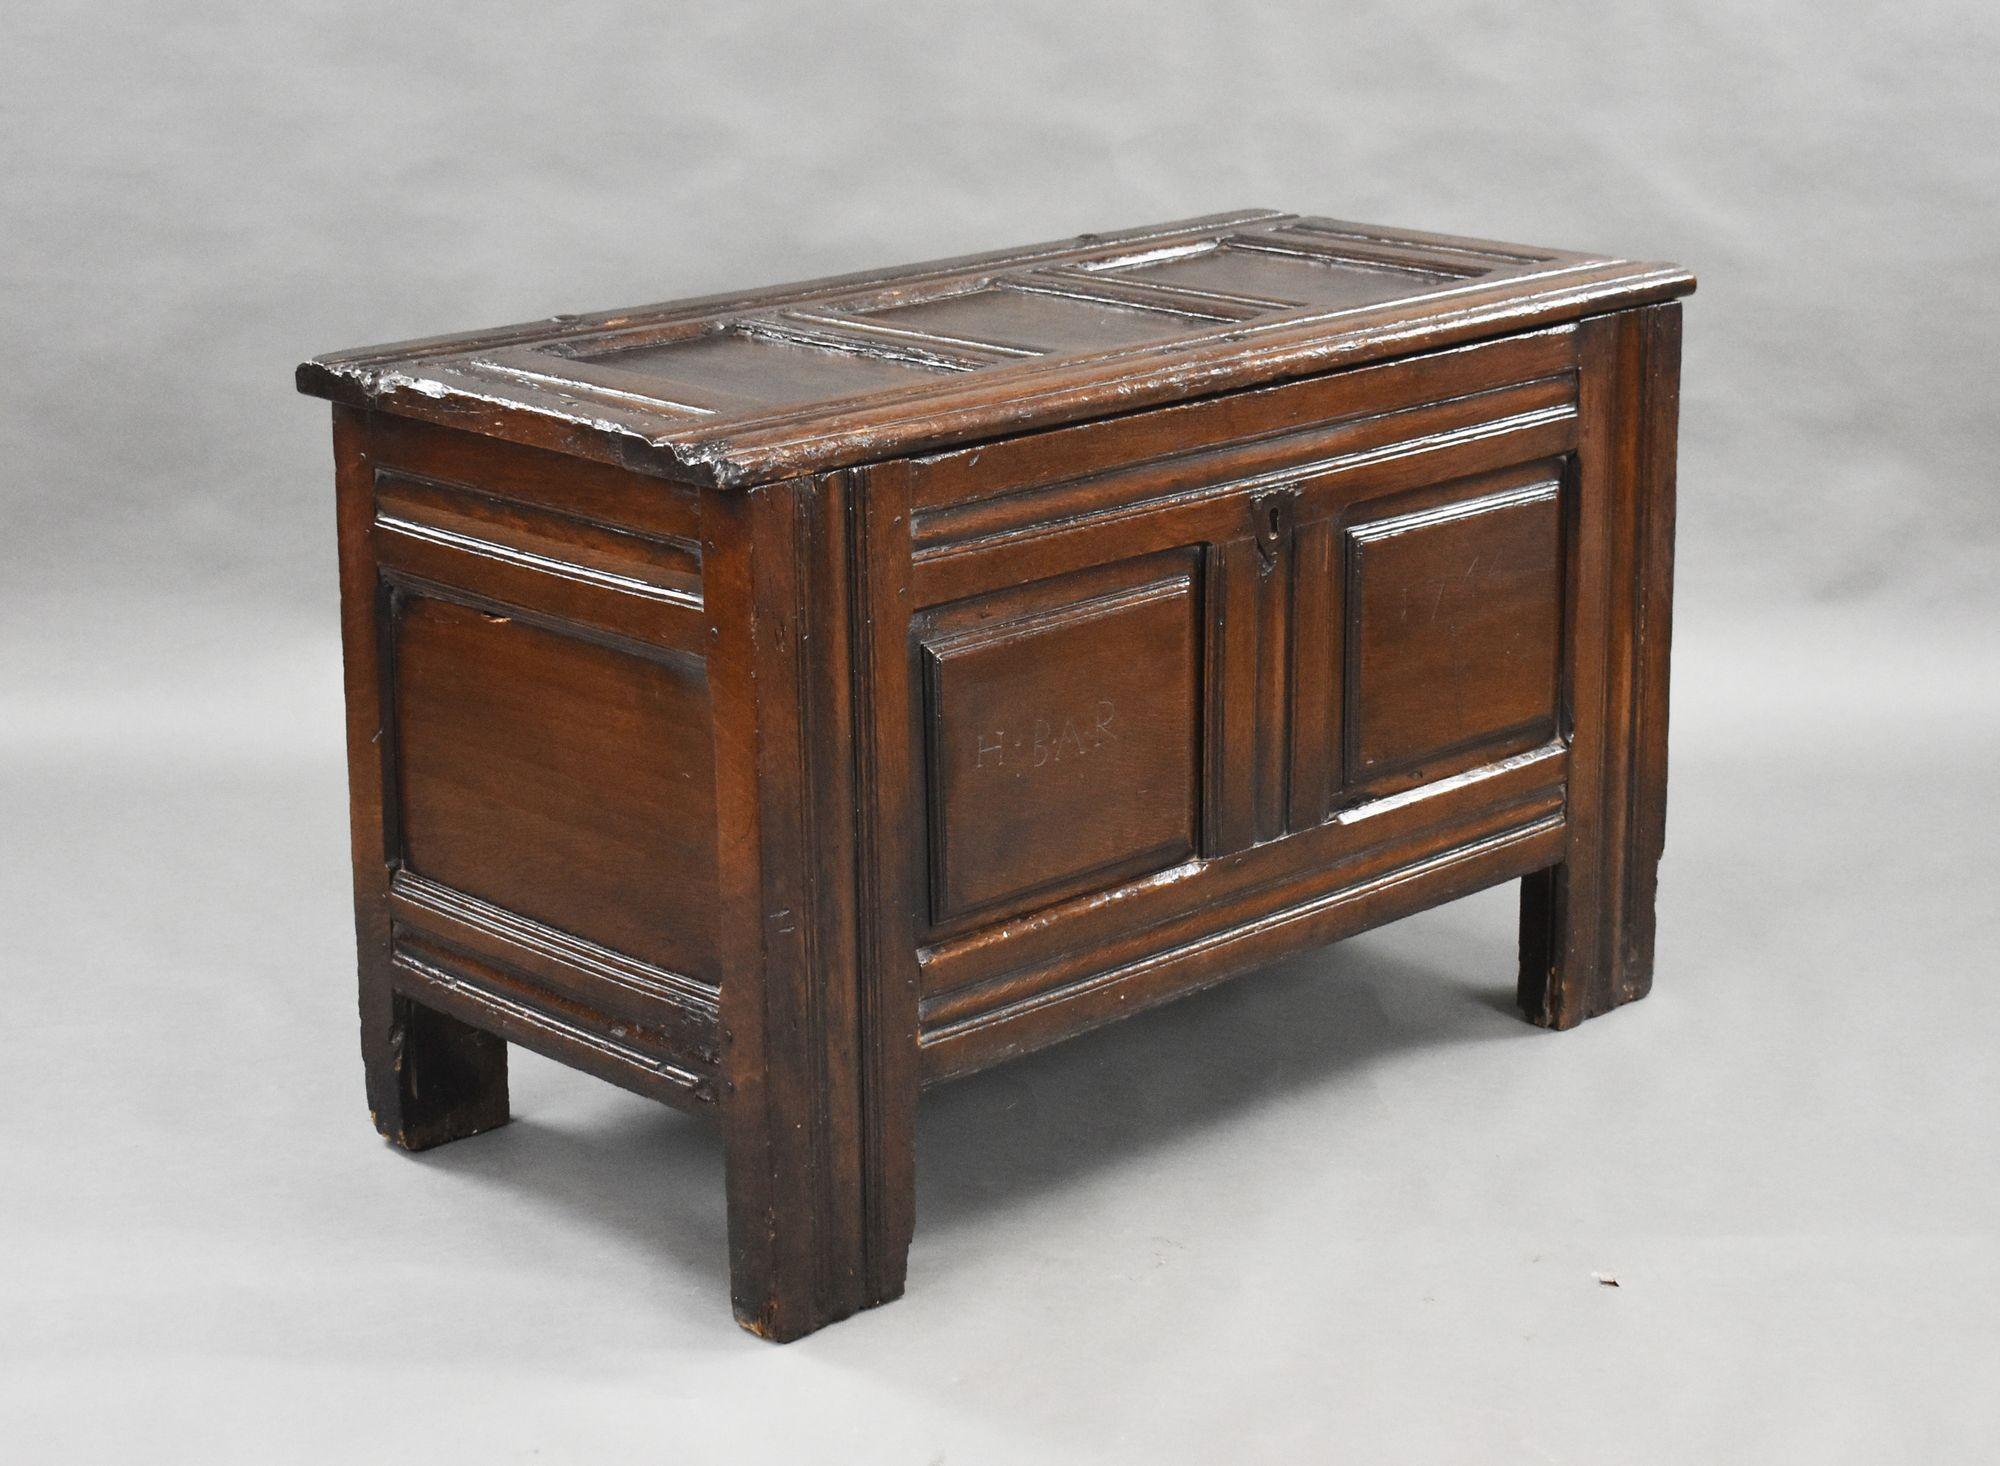 For sale is a good quality mid 17th century oak marriage chest, having a three panel top with raised and fielded panels to the front, with a carved date of 1744 and the initials H.B.A.R, probably to commemorate a marriage.

Width: 118cm Depth: 57cm